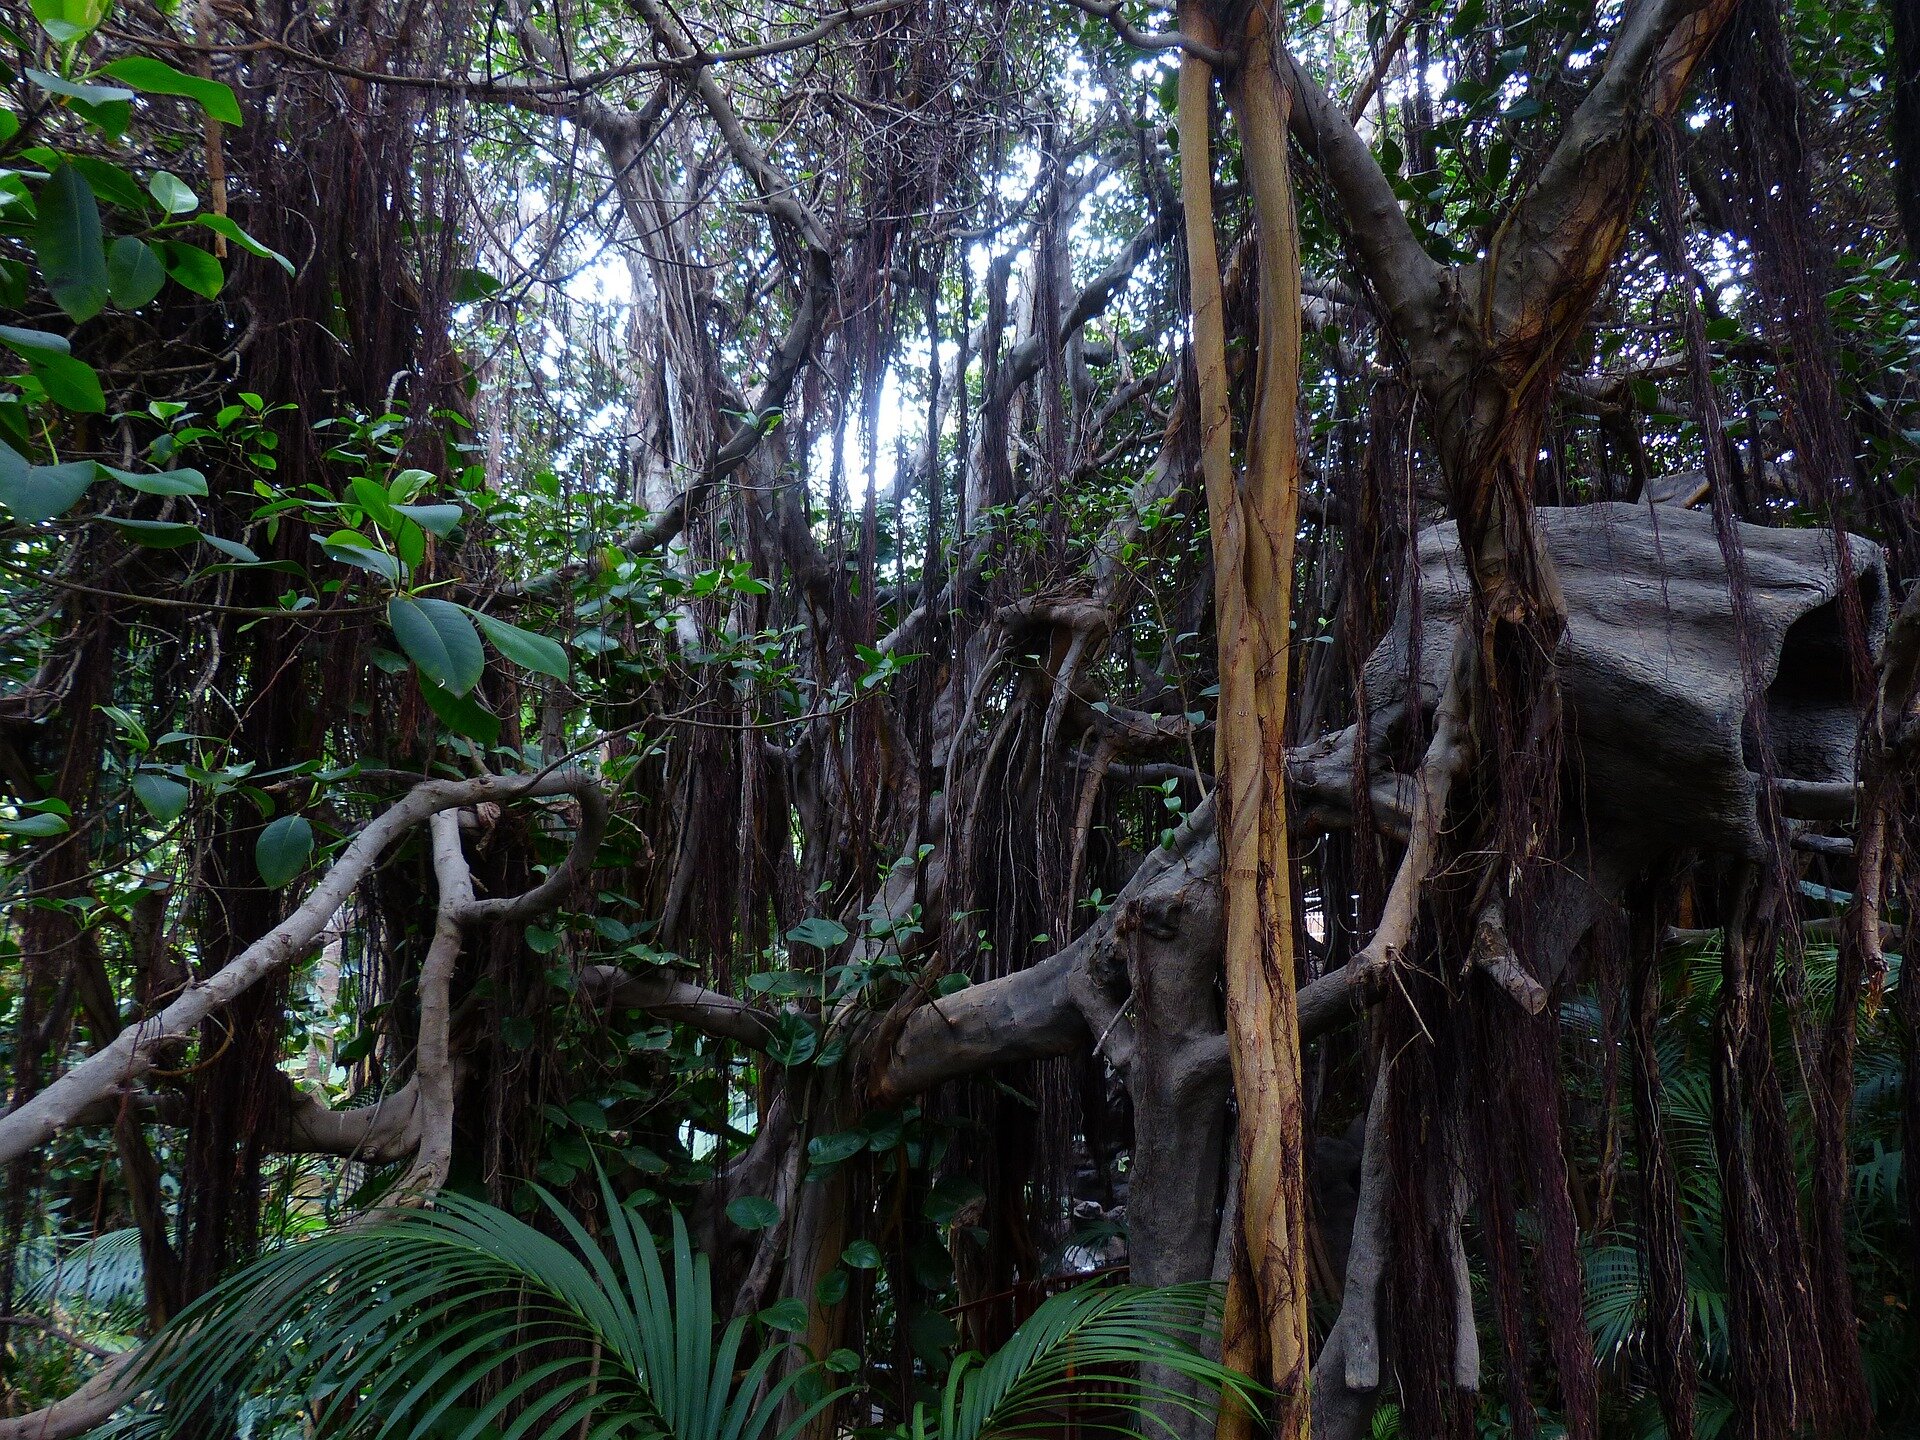 #Lianas, trees show varied stem xylem structure-function link